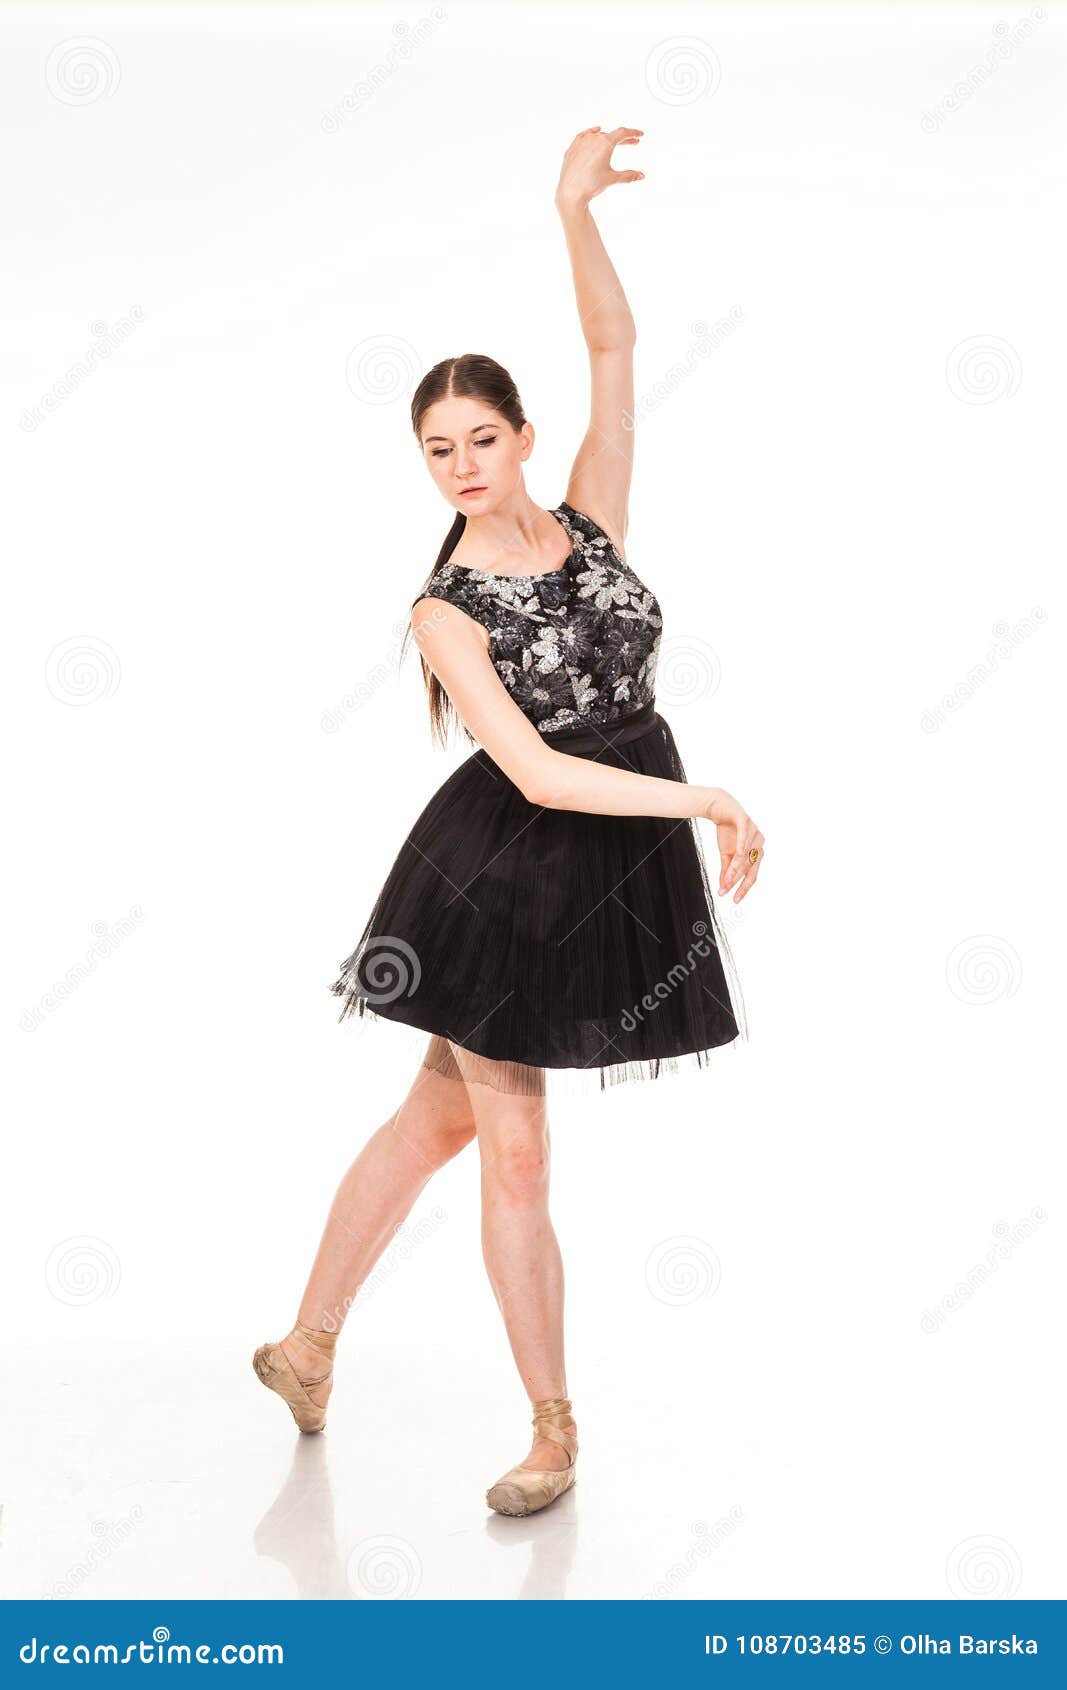 Acrobatic Pose: Over 101,226 Royalty-Free Licensable Stock Photos |  Shutterstock